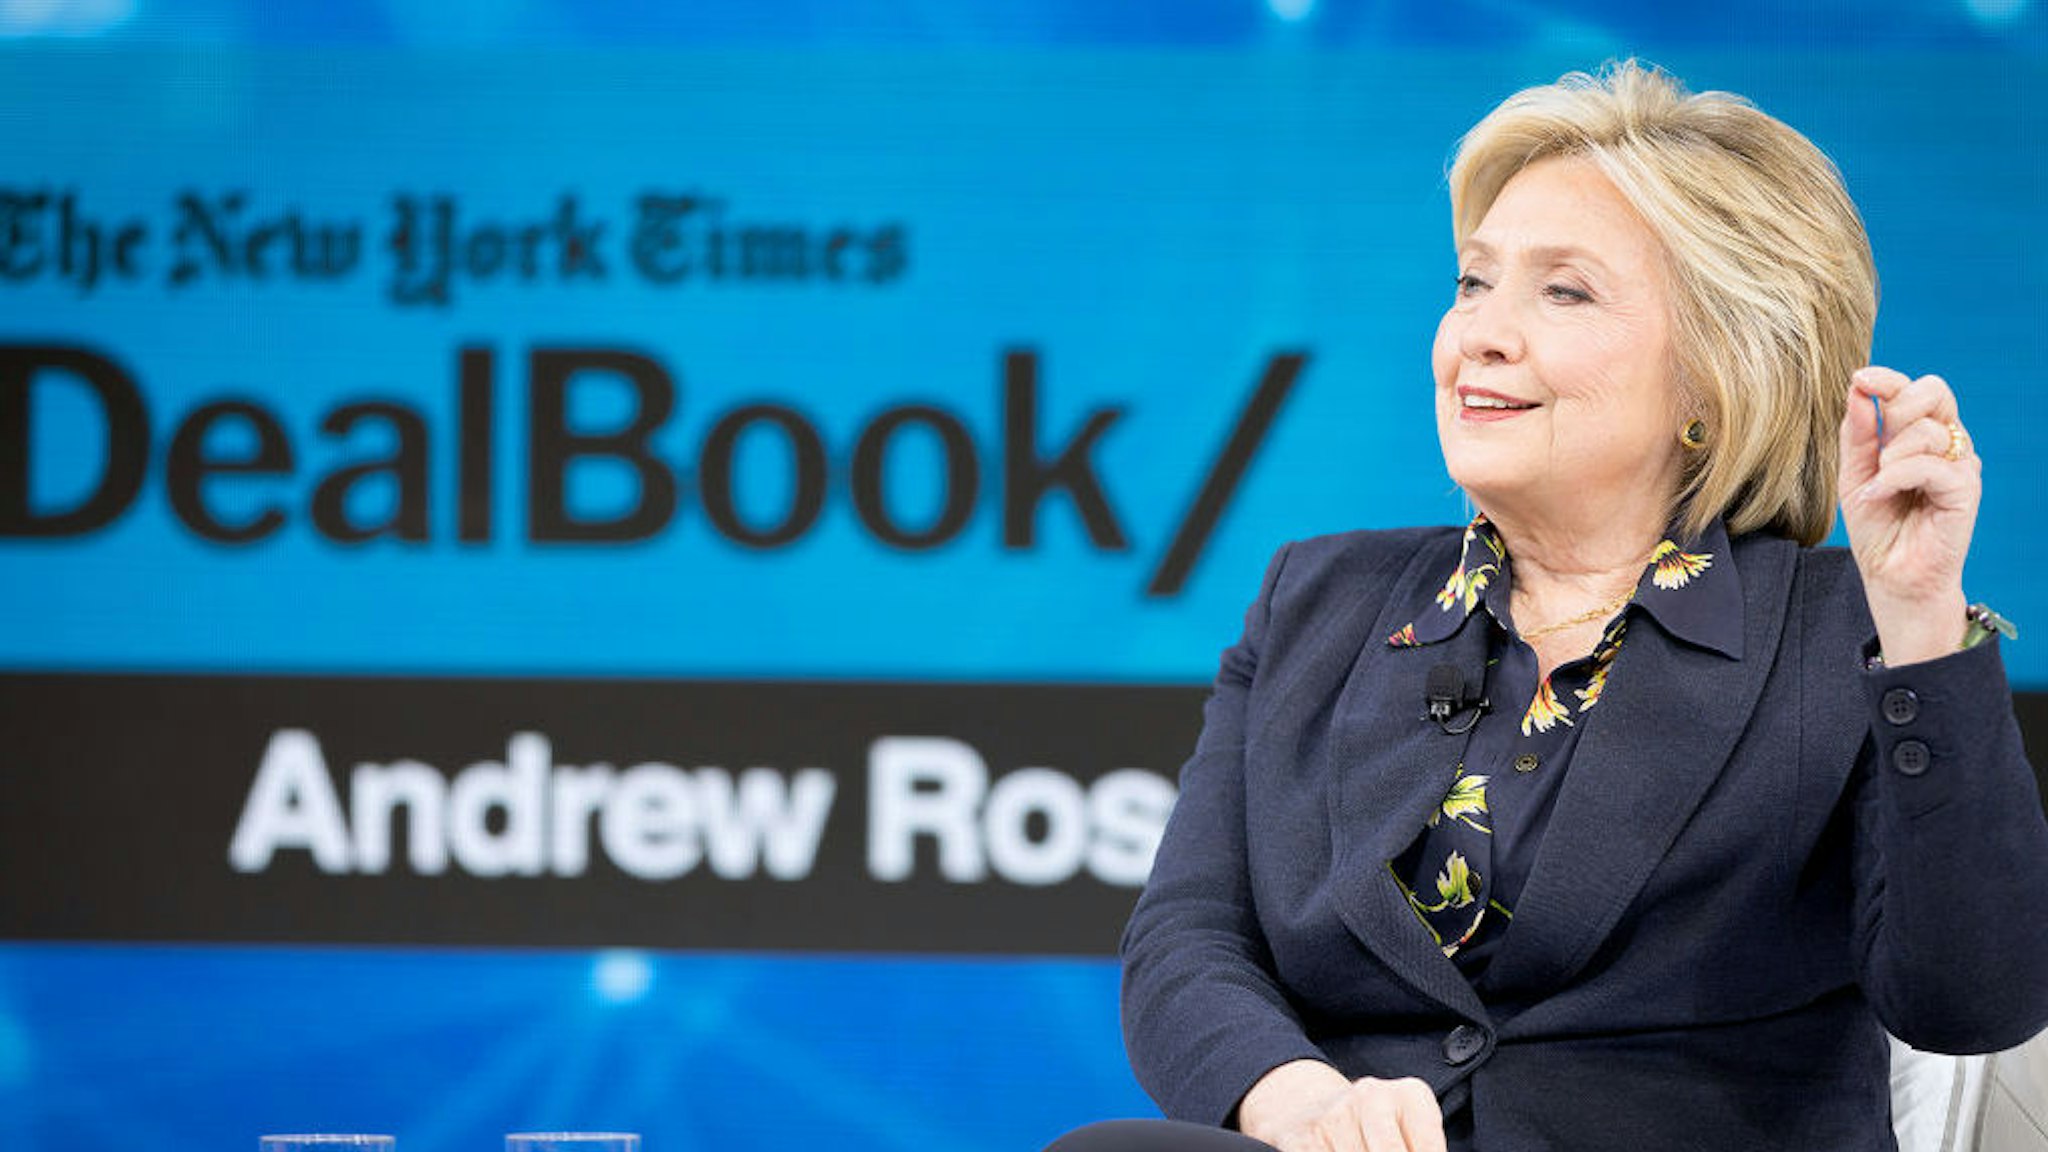 Hillary Rodham Clinton, Former First Lady, U.S. Senator, U.S. Secretary of State speaks onstage at 2019 New York Times Dealbook on November 06, 2019 in New York City. (Photo by Mike Cohen/Getty Images for The New York Times)